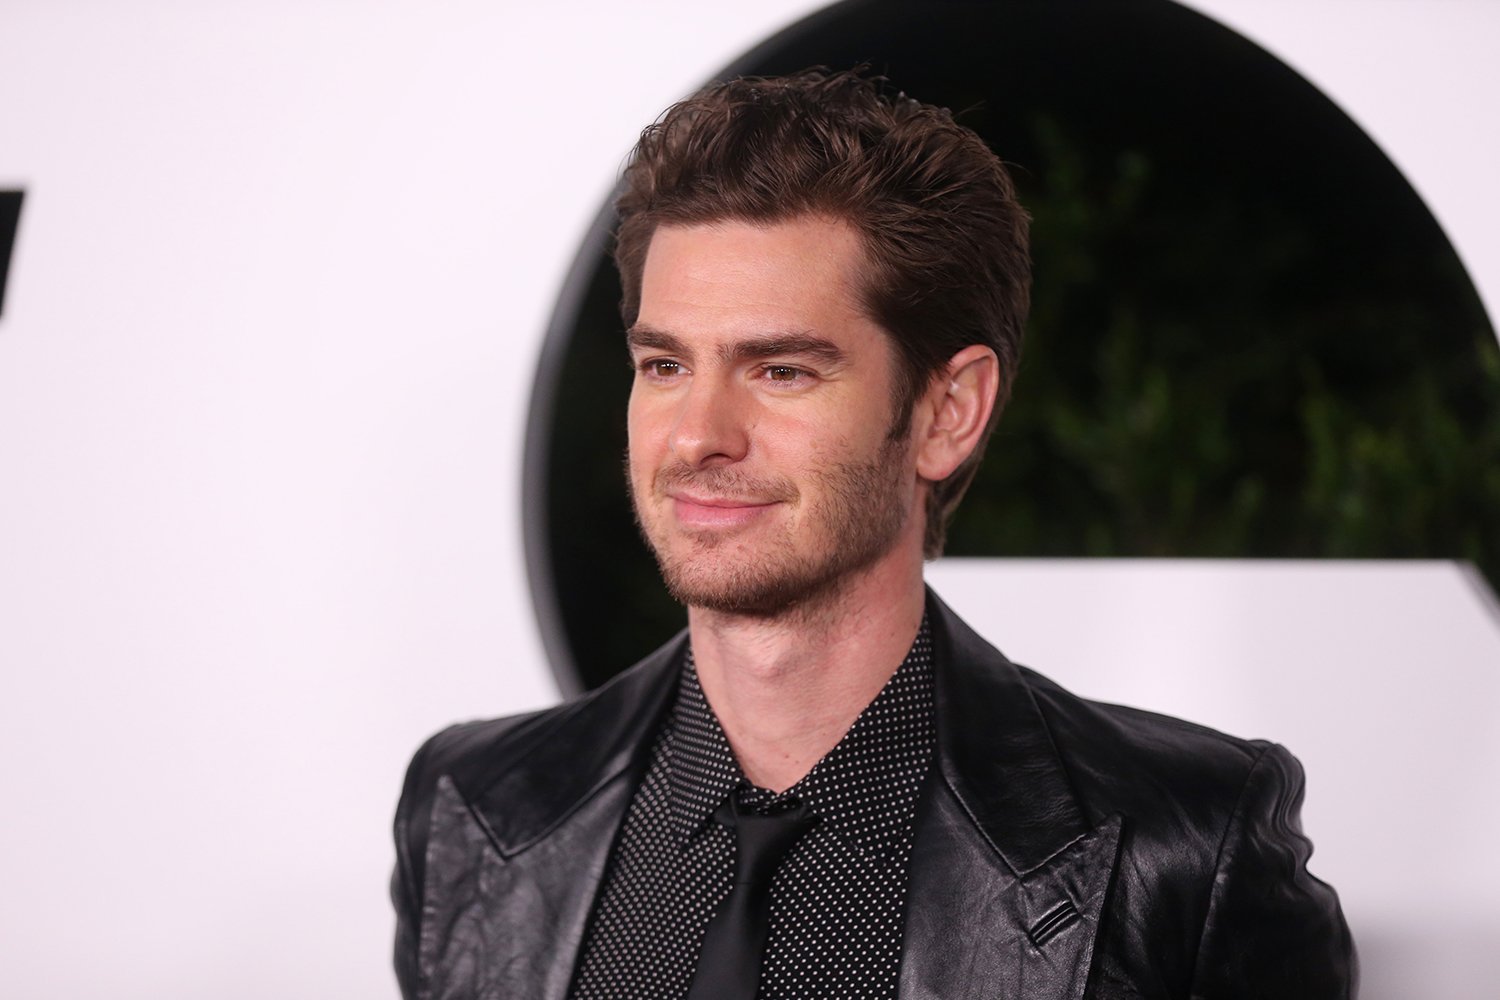 Spider-Man: No Way Home star Andrew Garfield at the 2021 GQ Men Of The Year Celebration